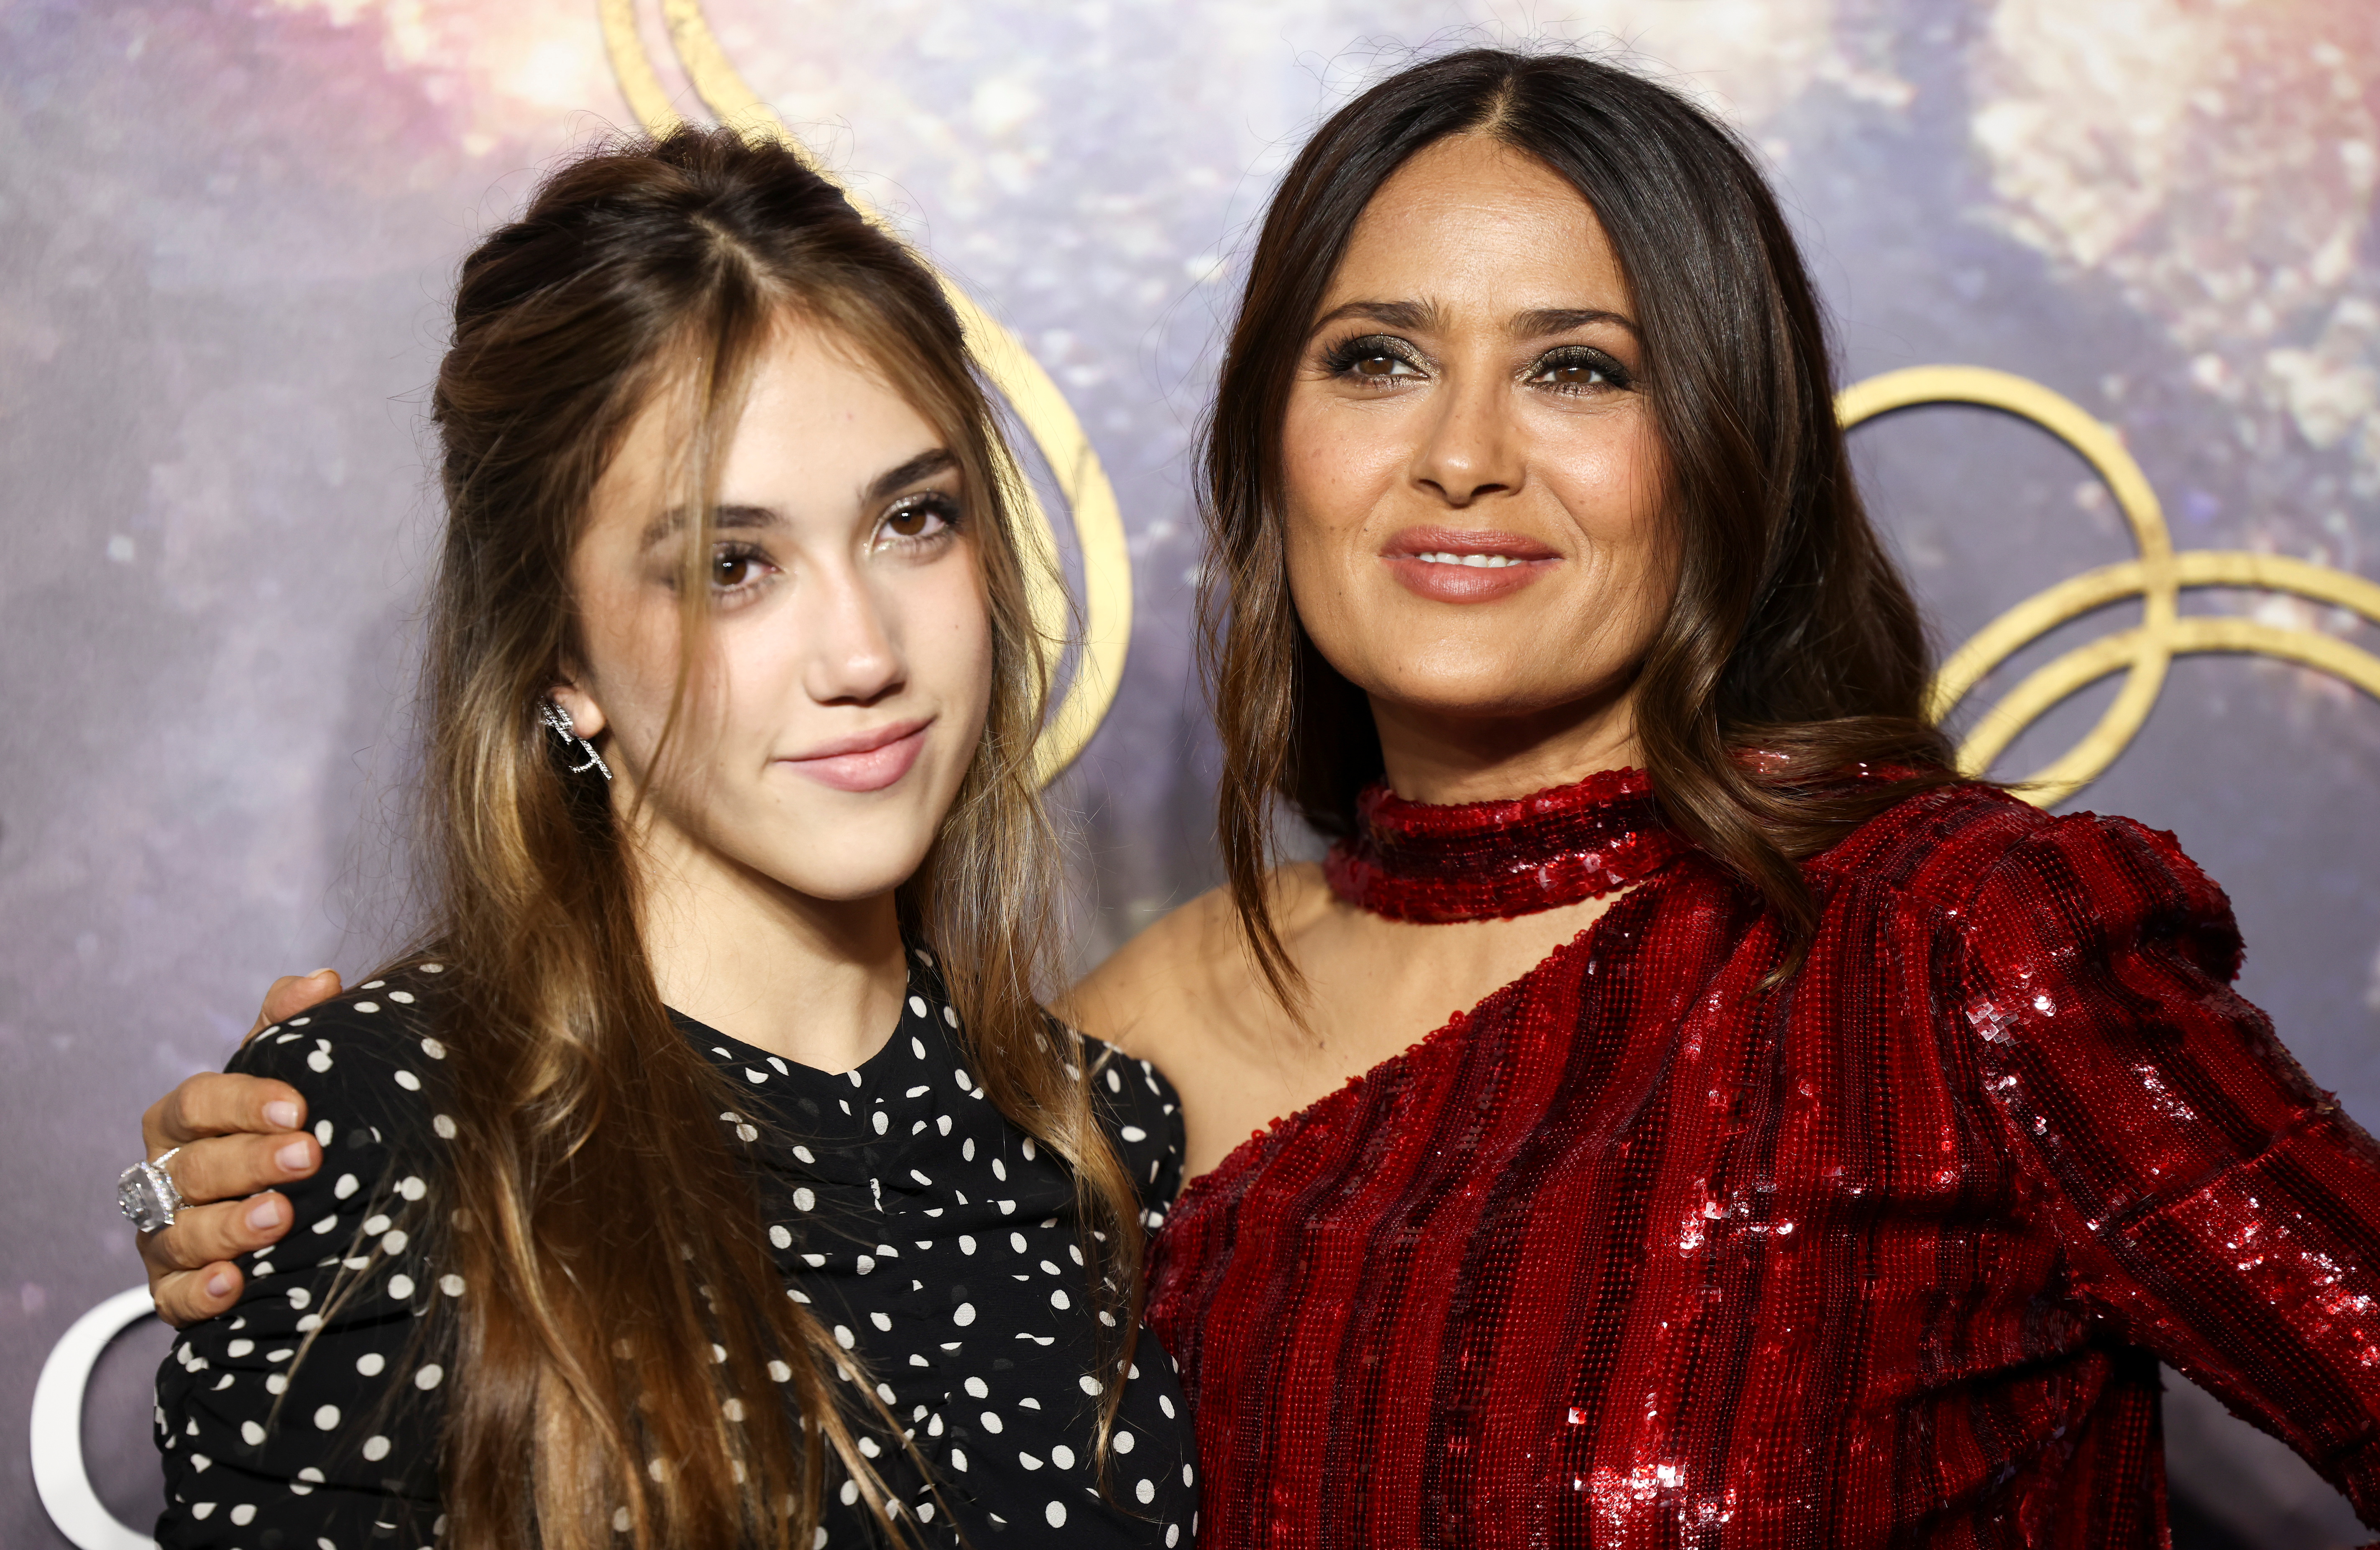 Salma Hayek with Valentina Pinault at the awards of "Eternals" in London, Great Britain.  (Photo: REUTERS/Henry Nicholls)